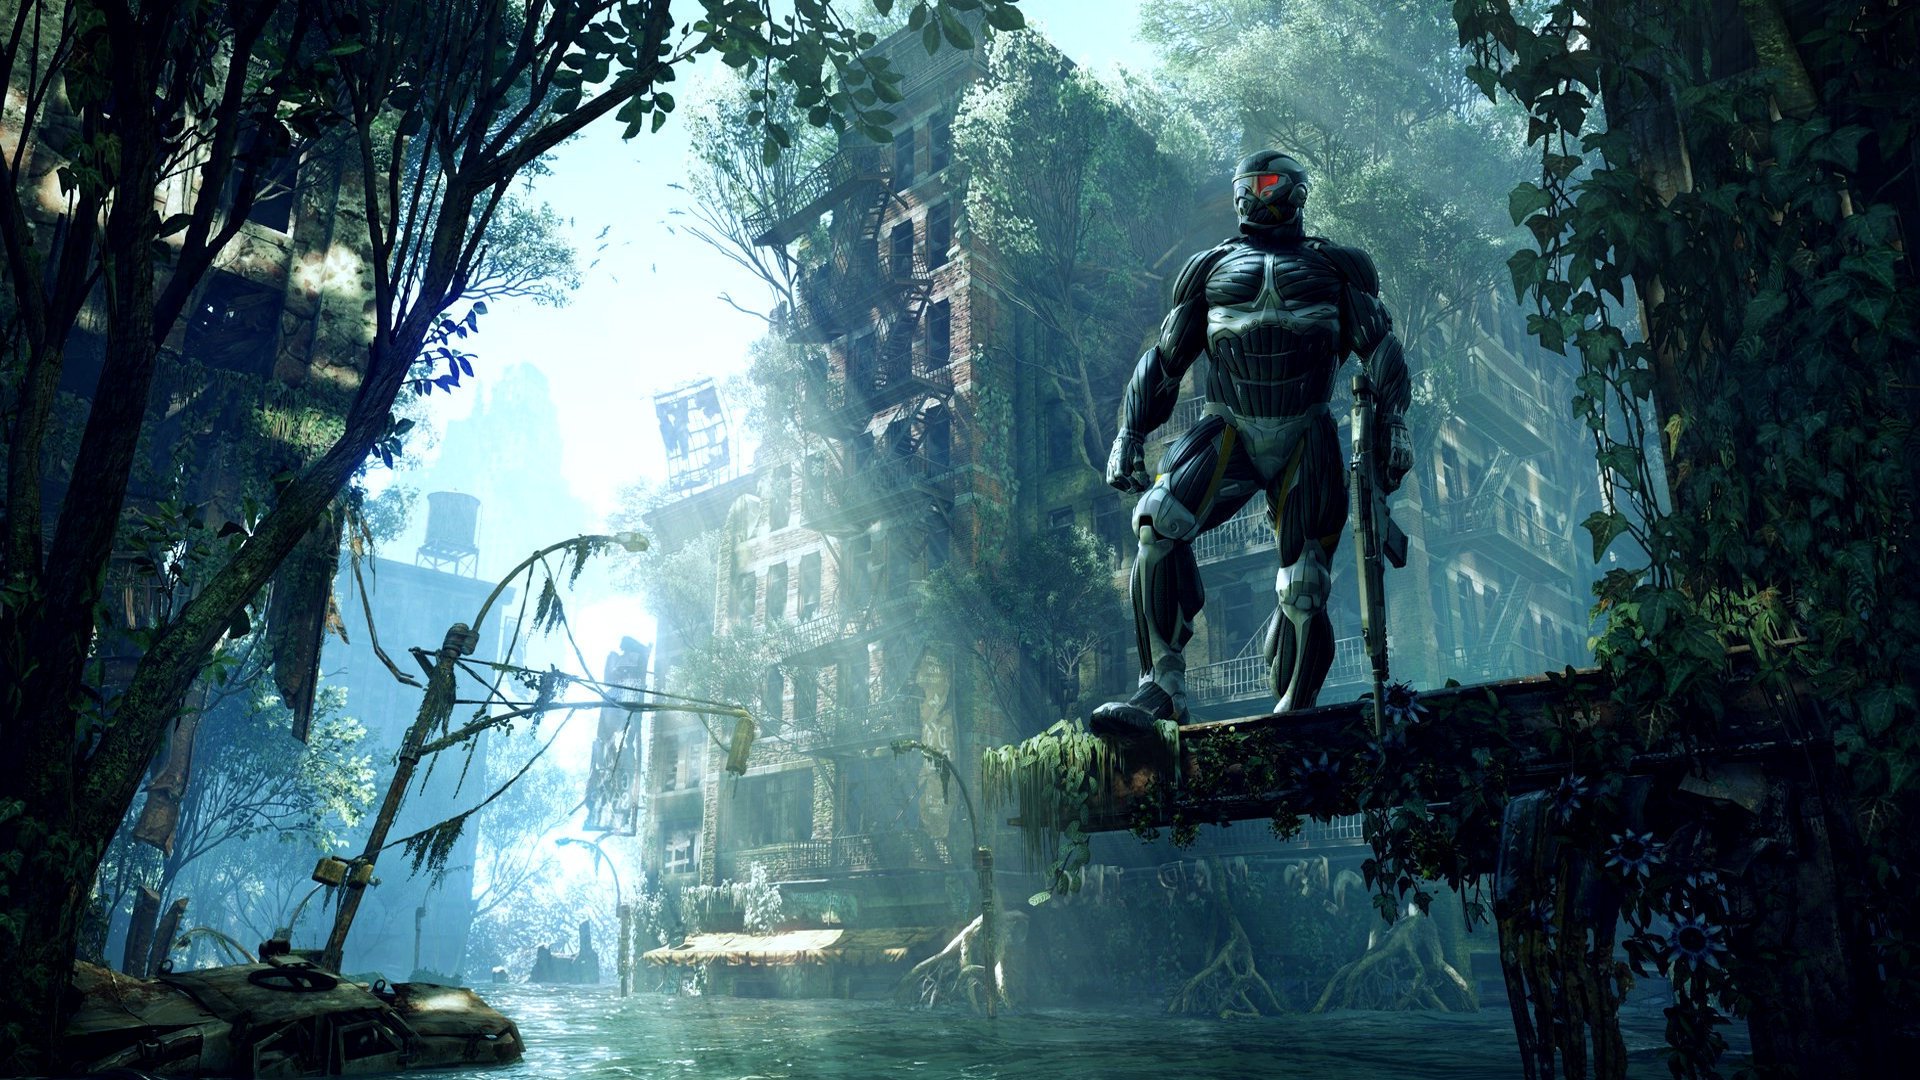 crysis, Sci fi, Fps, Shooter, Action, Fighing, Futuristic, Warrior, Military, Apocalyptic Wallpaper